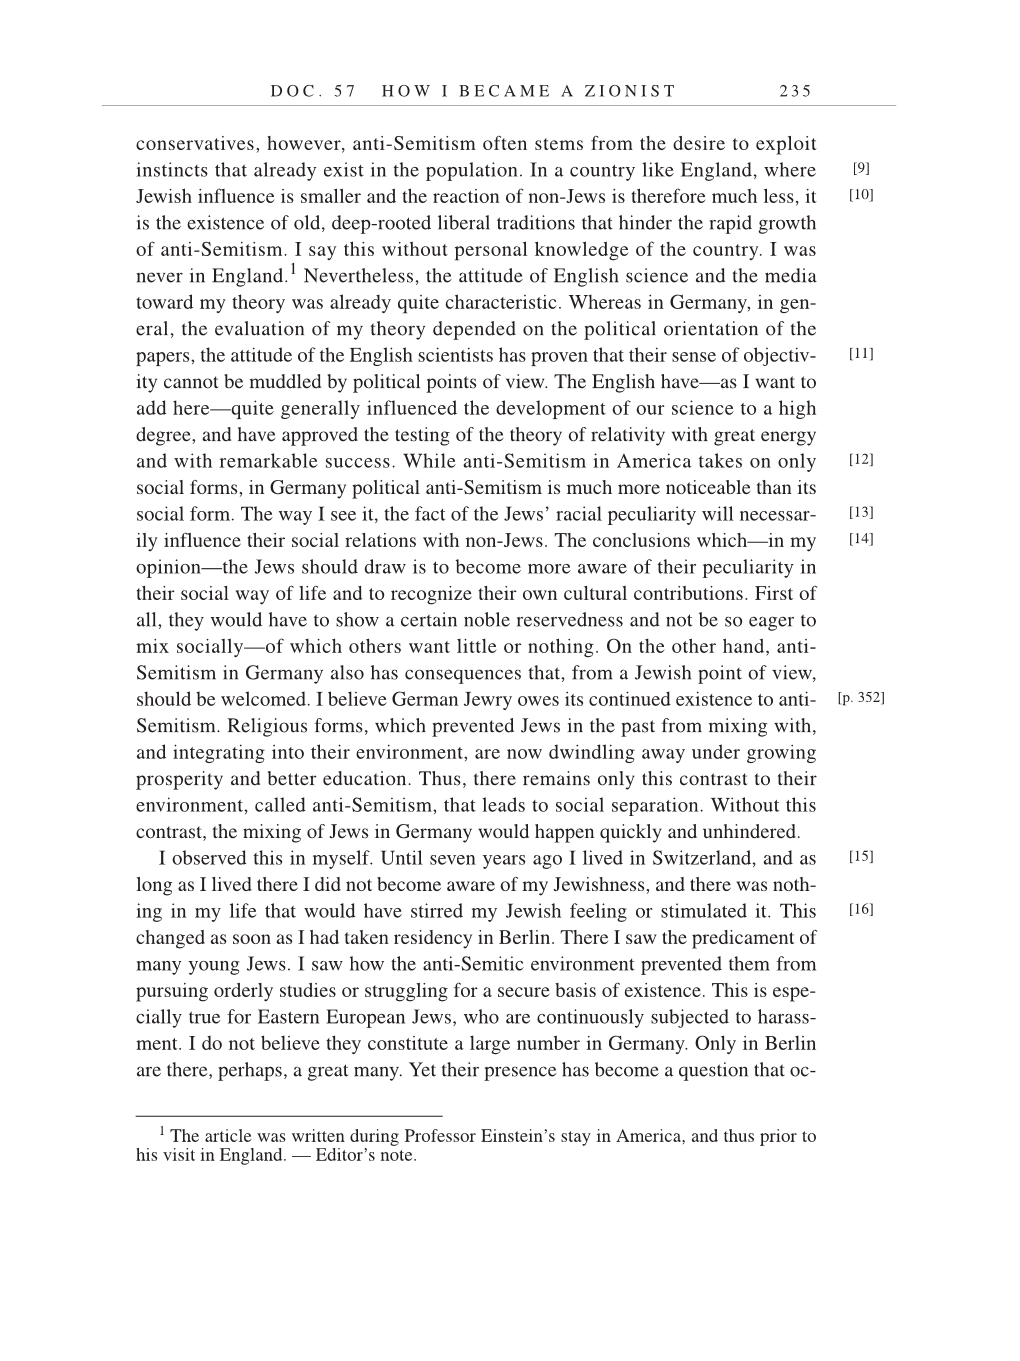 Volume 7: The Berlin Years: Writings, 1918-1921 (English translation supplement) page 235